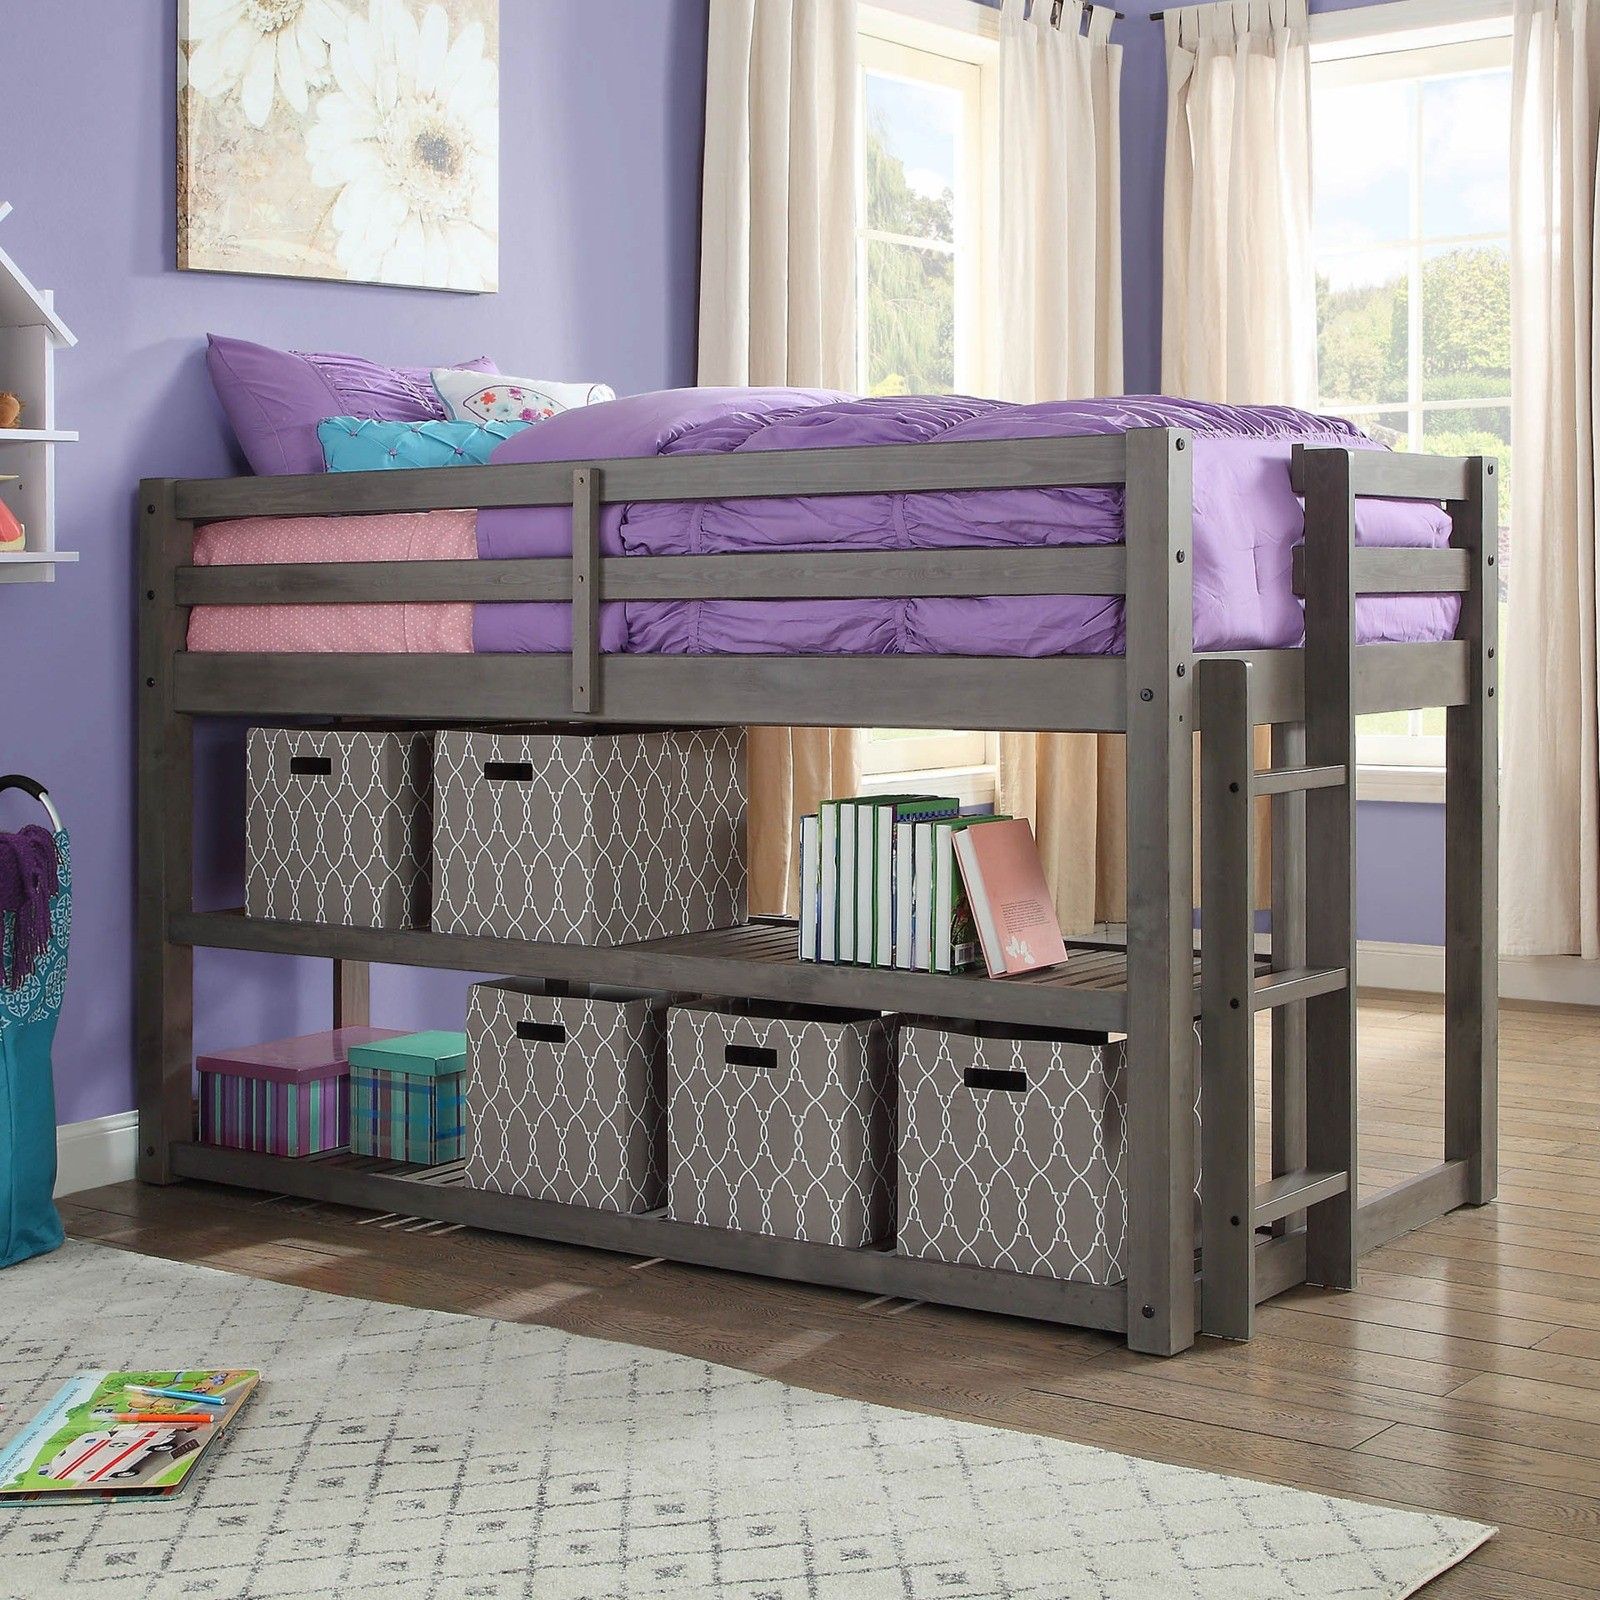 Better Homes and Gardens Greer Twin Loft Storage Bed with Spacious Storage Shelves